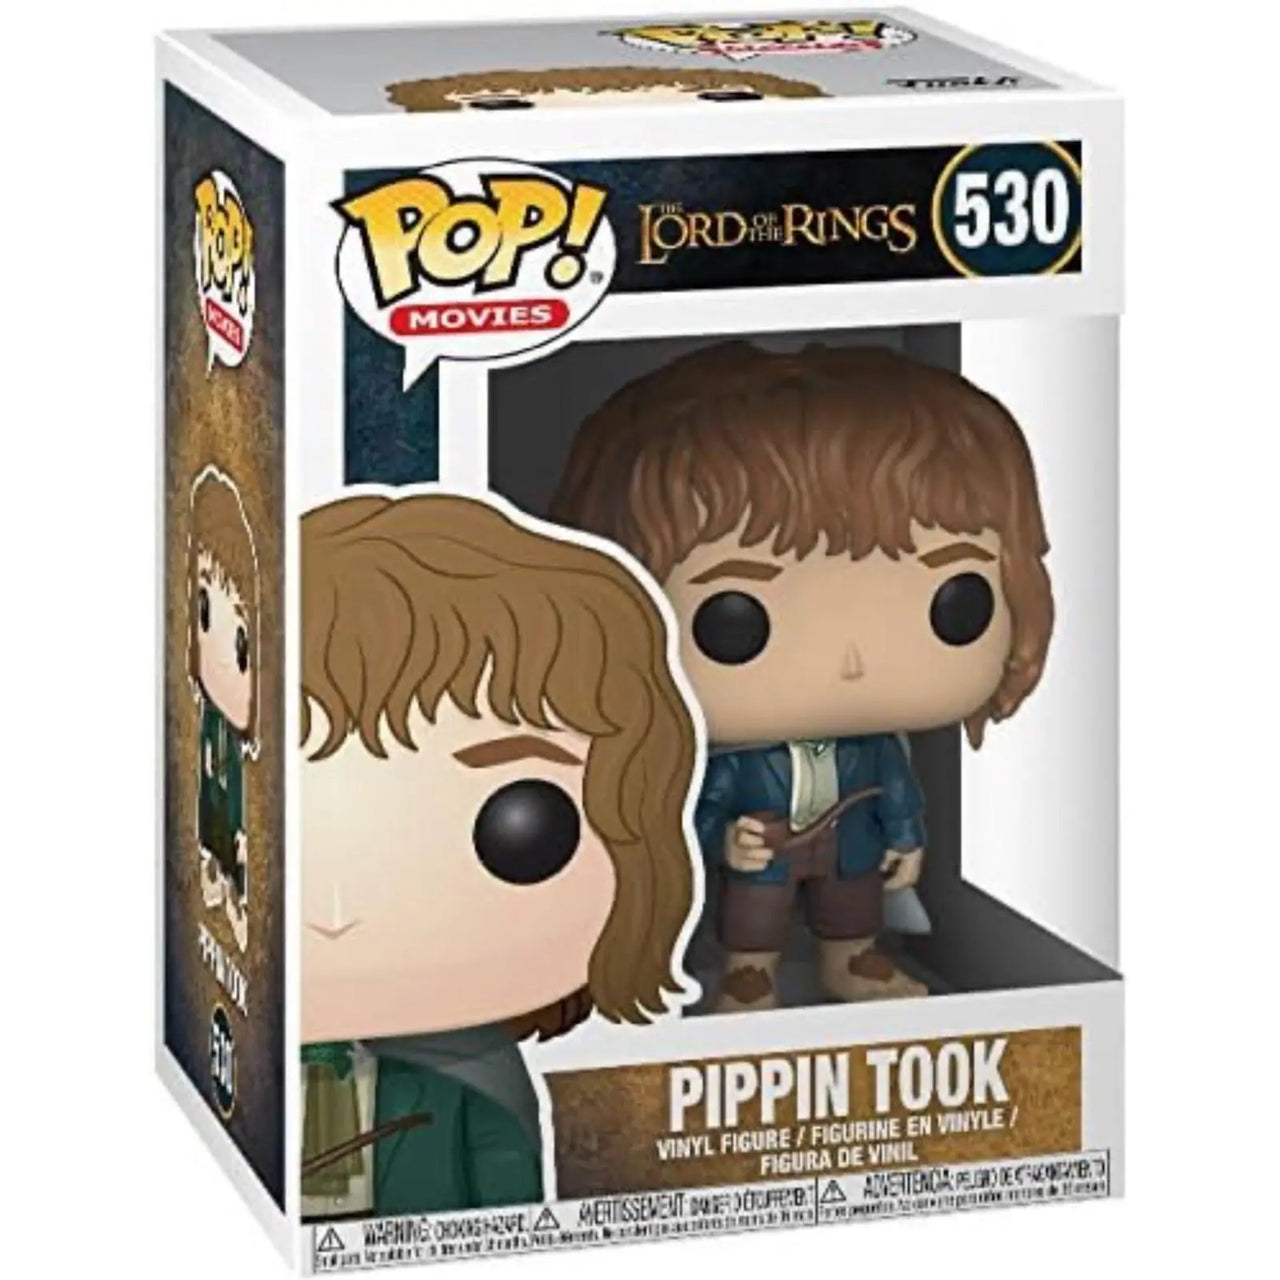 Funko Pop! Movies the Lord of the Rings 530 Pippin Took Funko